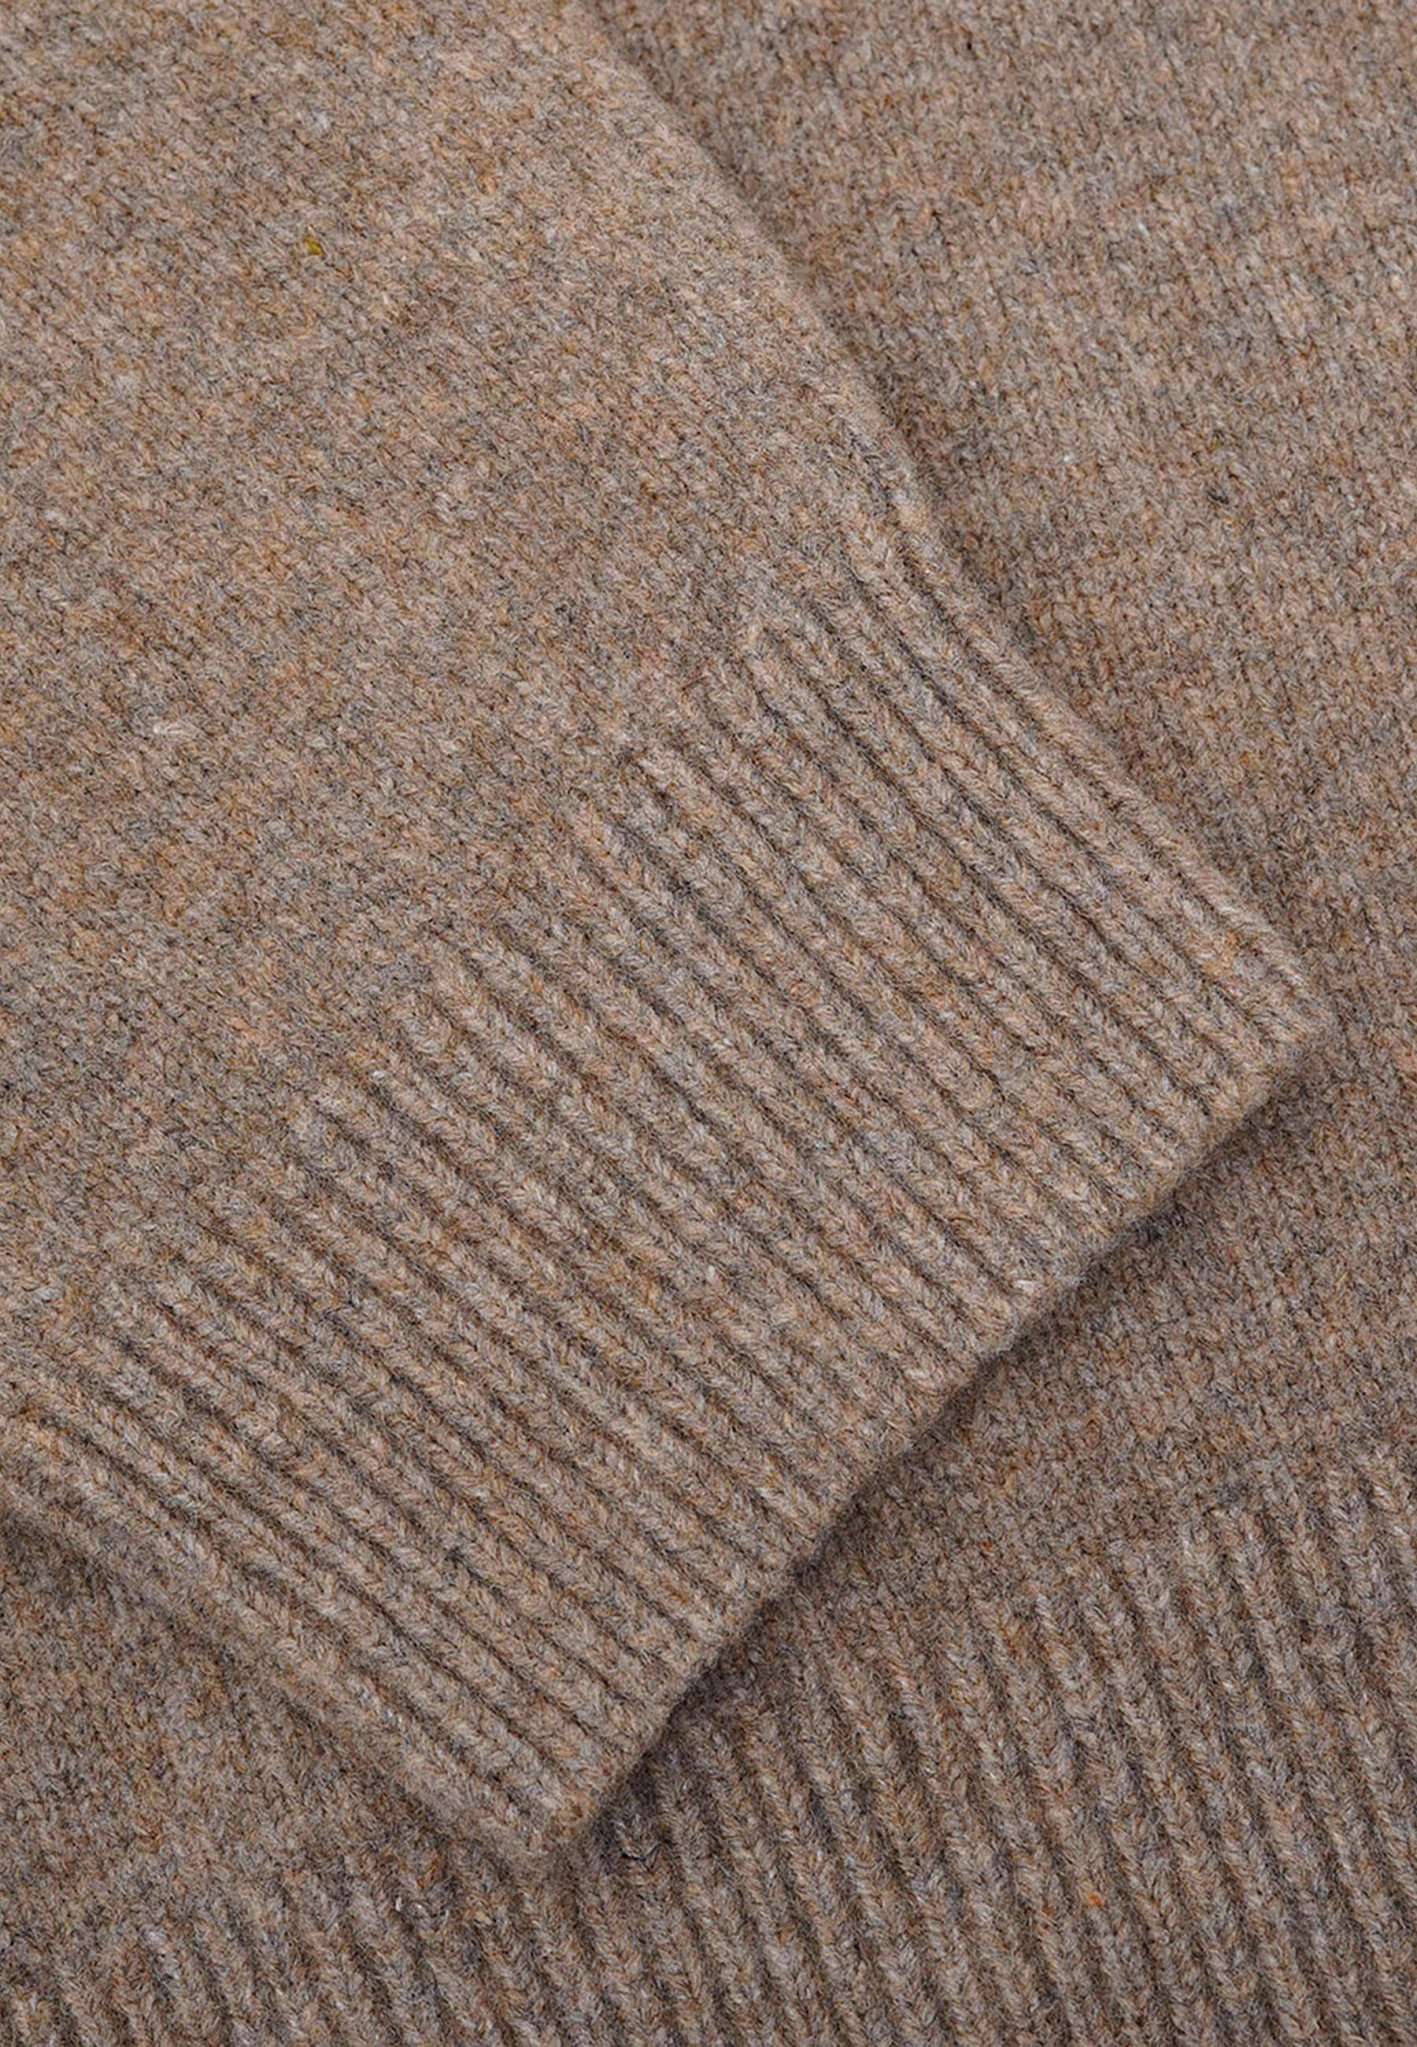 Roundneck-Woolen Touch in Wood Pullover Colours and Sons   